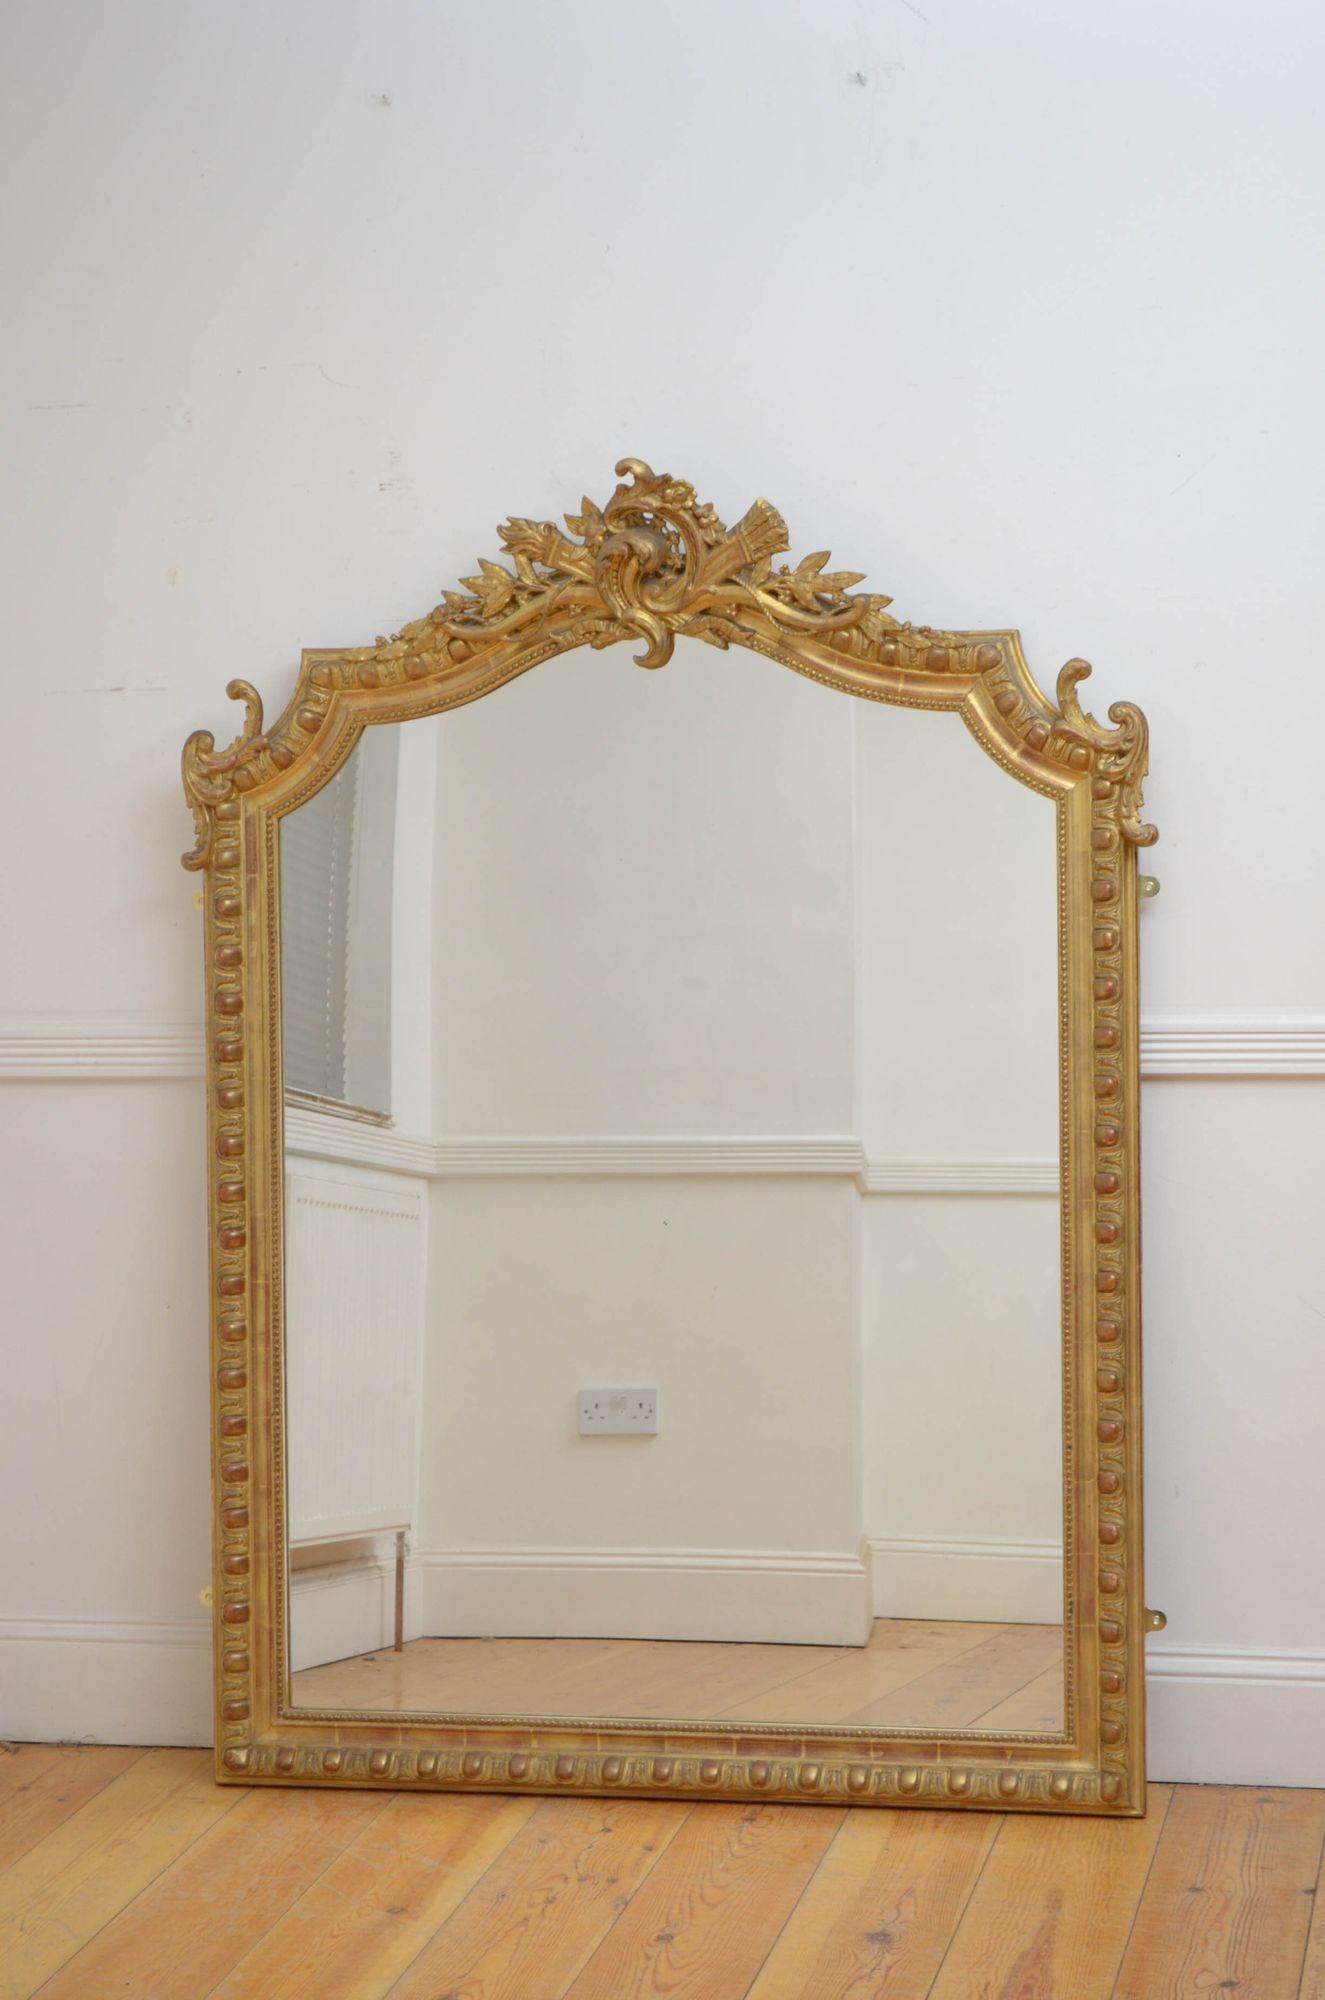 J014 Fine French gilded wall mirror, having original glass with minor imperfection in carved, beaded and gilded frame with finely carved centre crest flanked by leafy scrolls. This antique mirror retains original gilt and is in home ready condition.